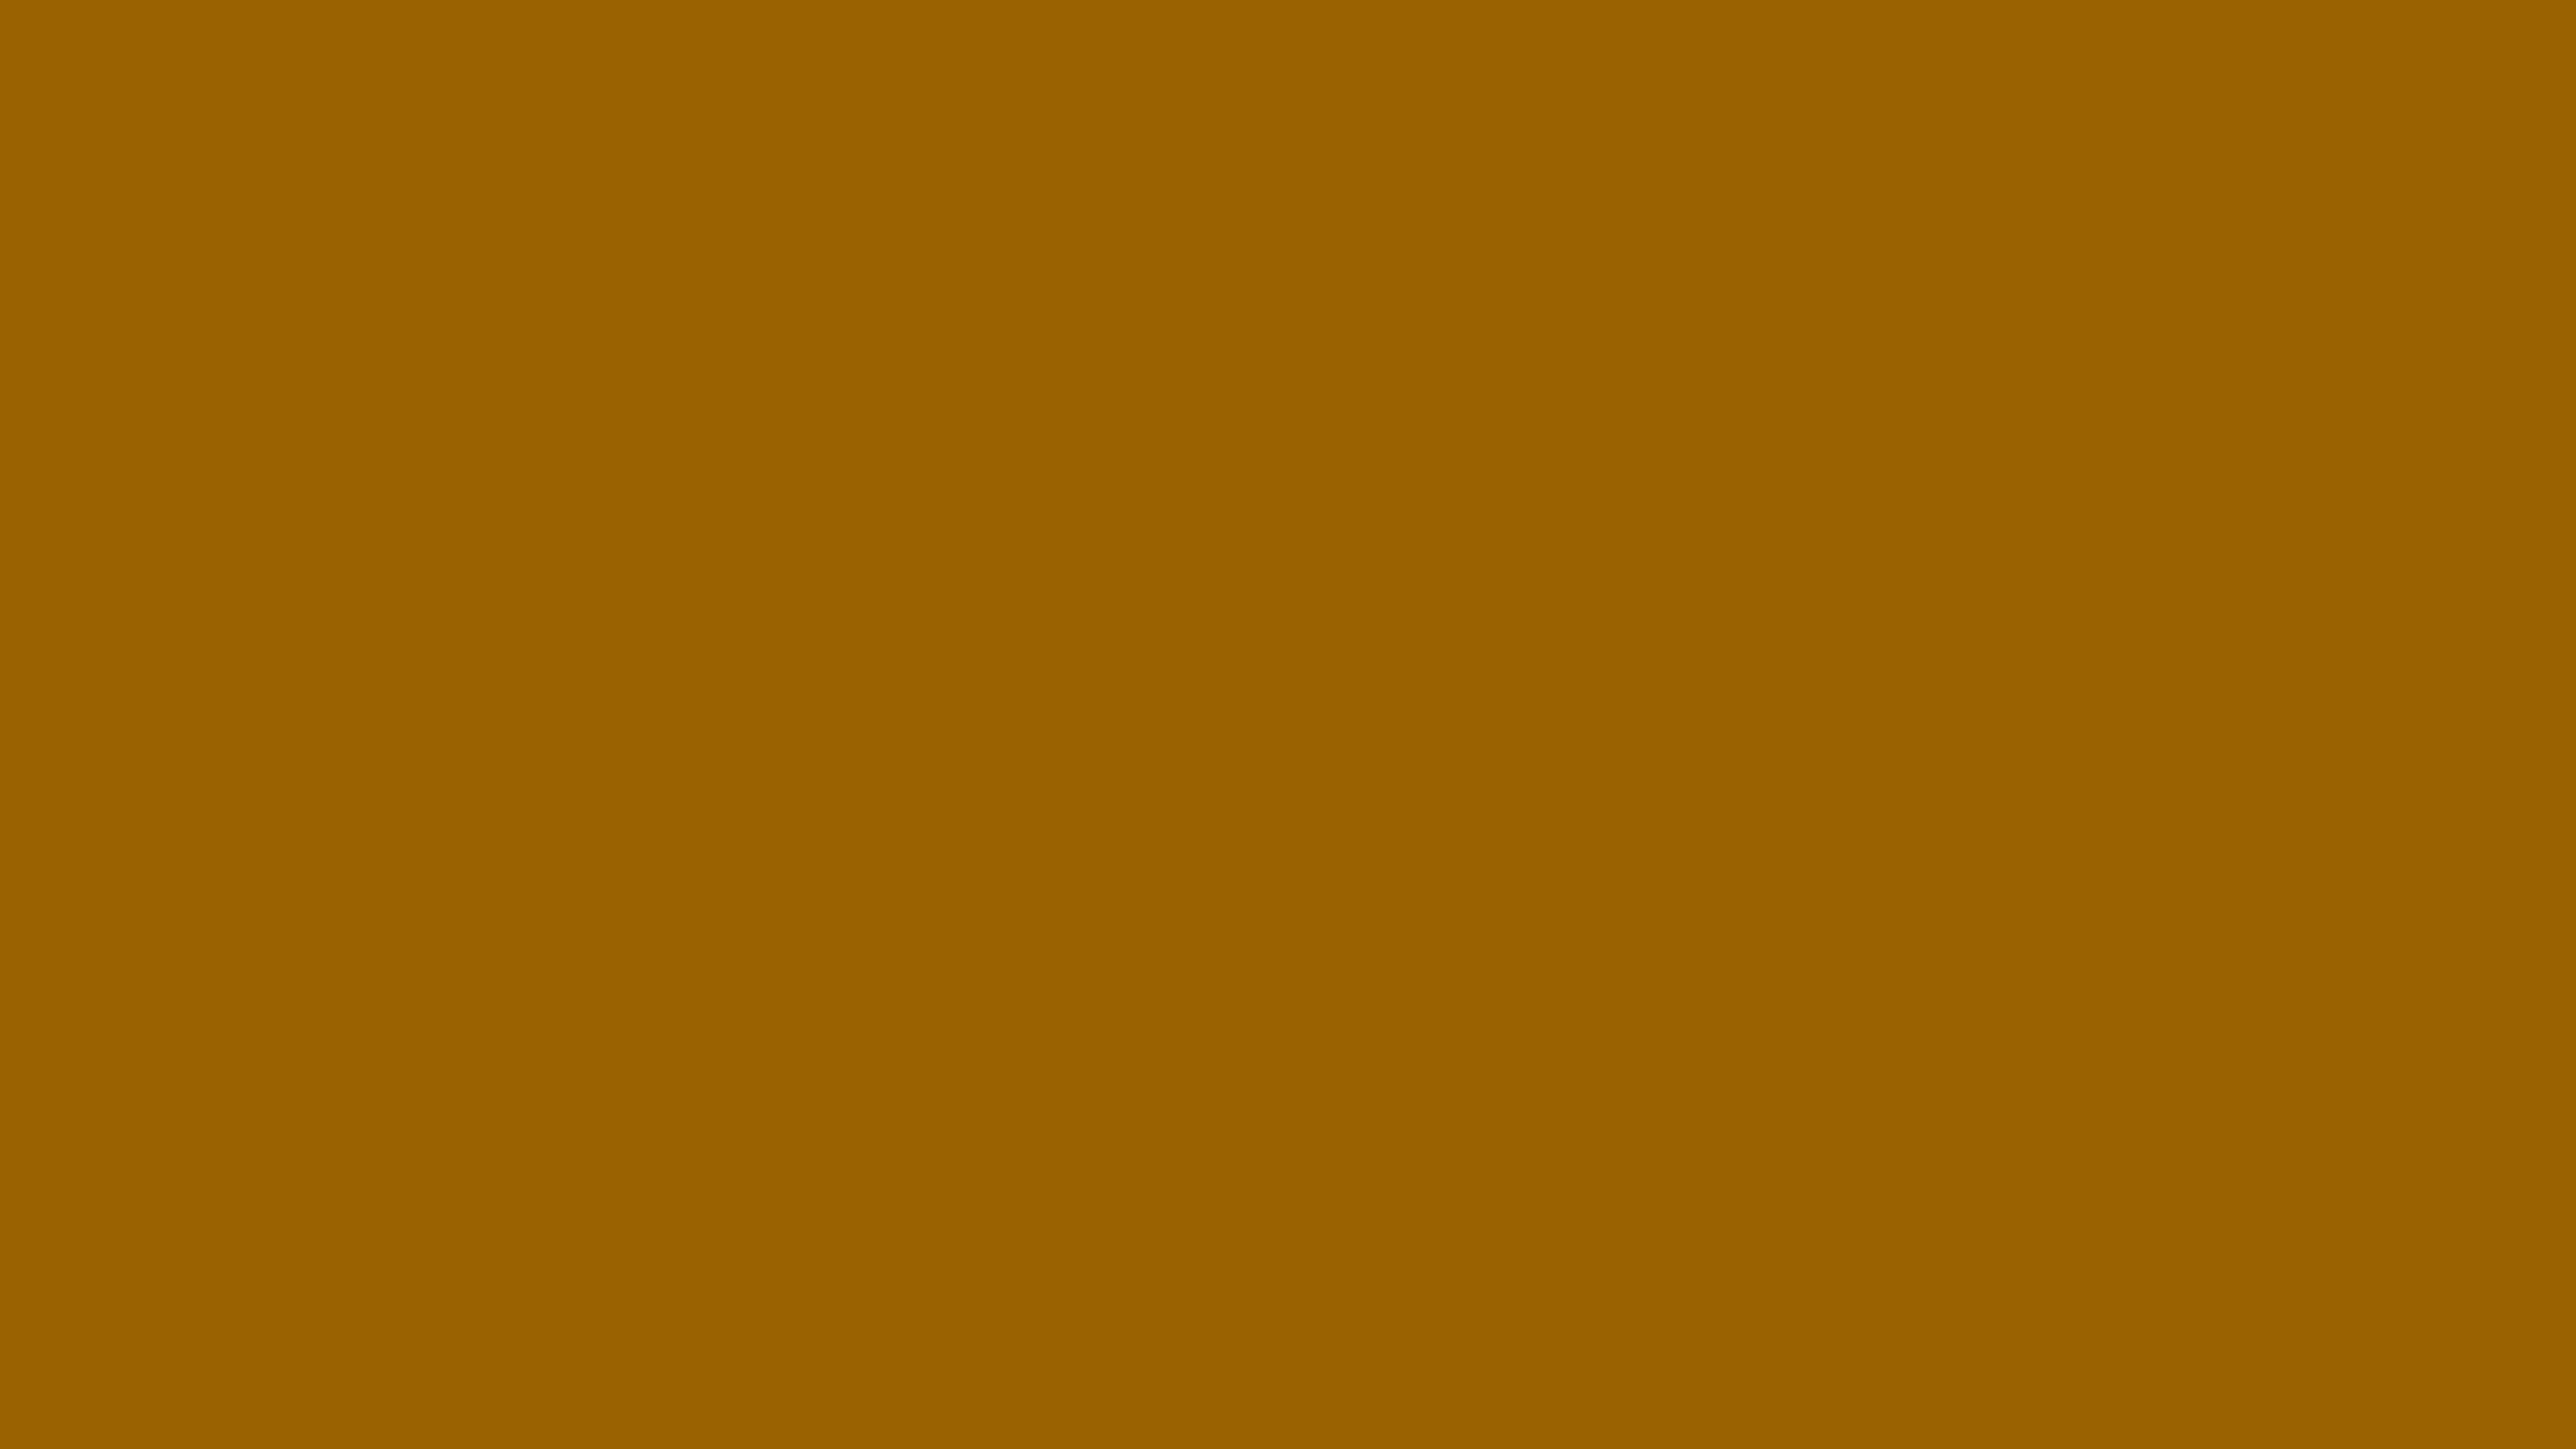 Raw Sienna Solid Color Background Image Free Image Generator